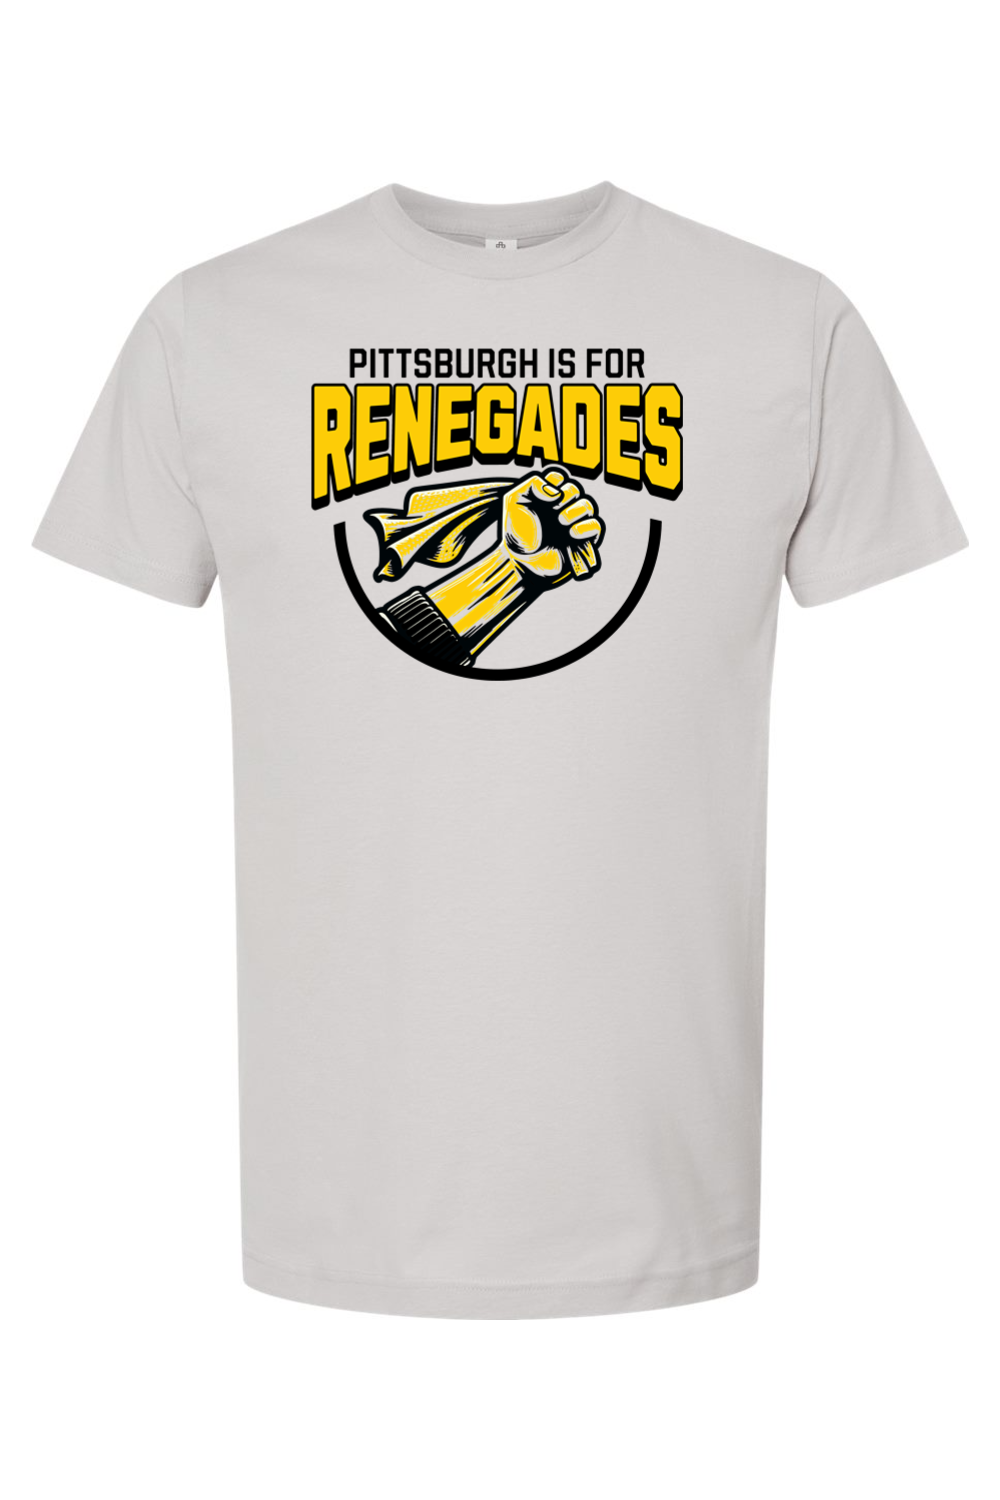 Pittsburgh is for Renegades - Yinzylvania